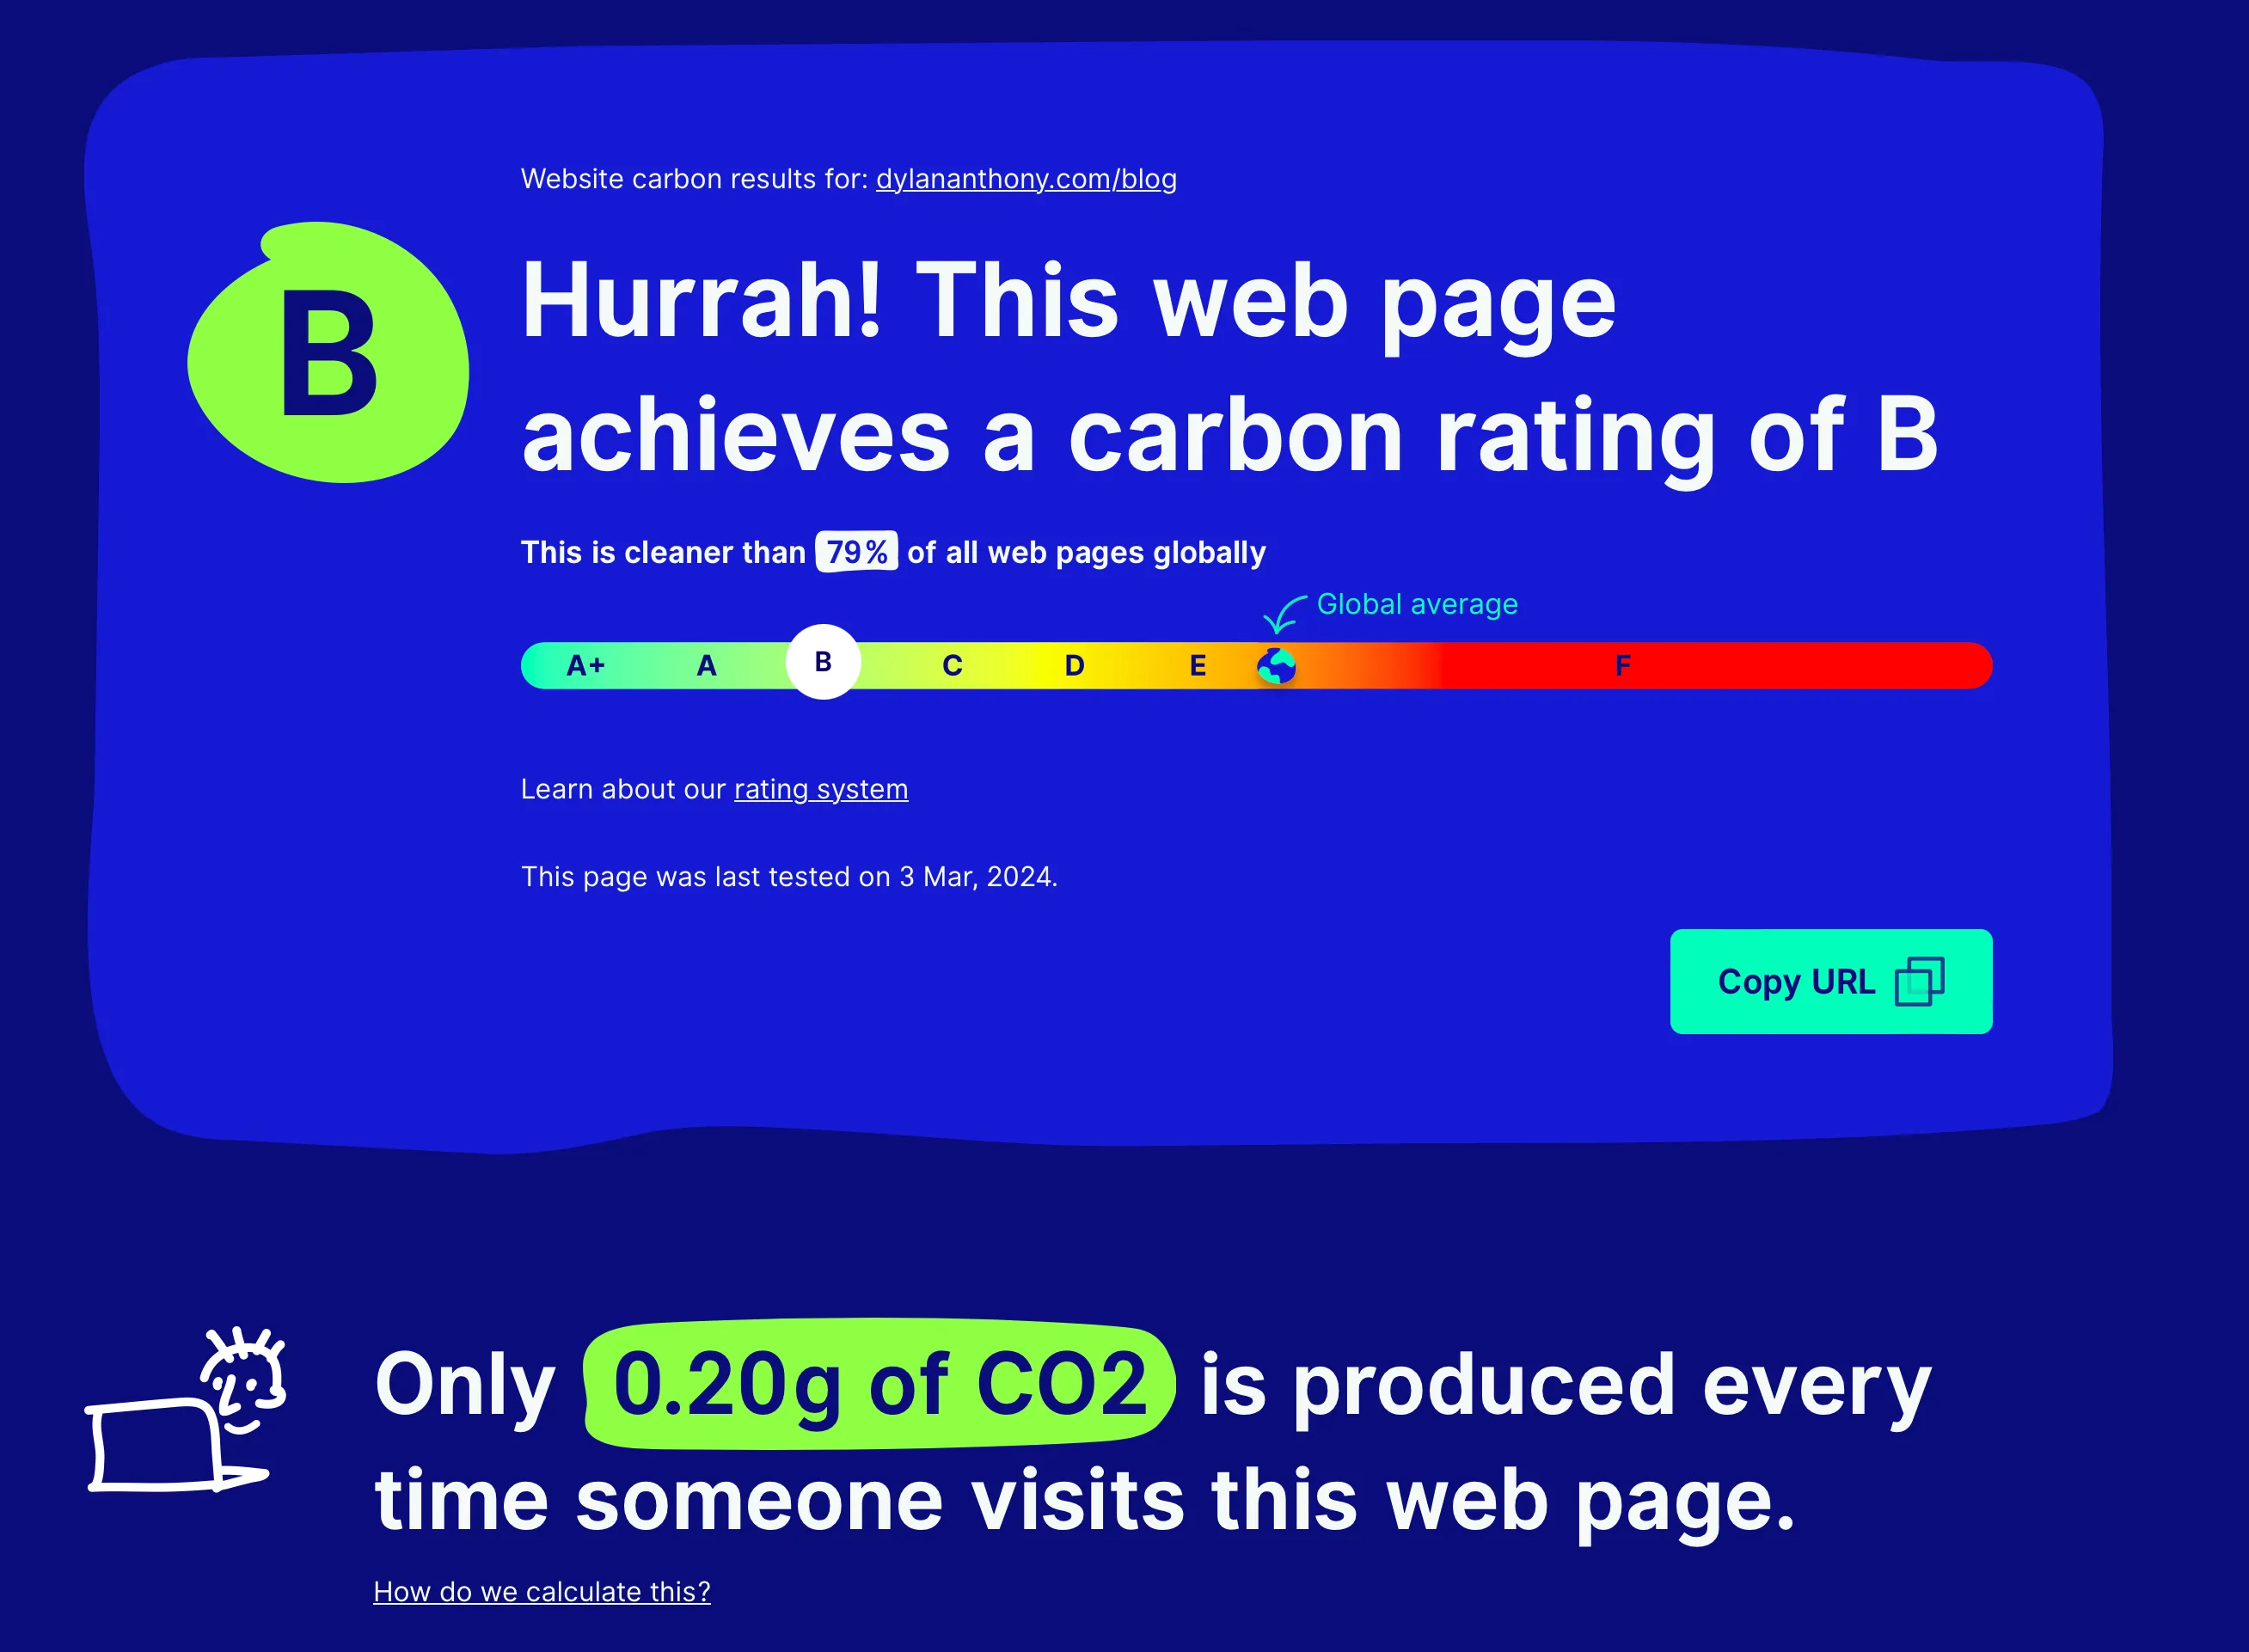 
A screenshot of websitecarbon.com. There is a scale from A+ (best) to F (worst), and my website gets a B.
This is cleaner than 79% of other websites, with the global average being between E and F.
Below the scale, the website states "Only 0.20g of CO2 is produced every time someone visits this webpage"
